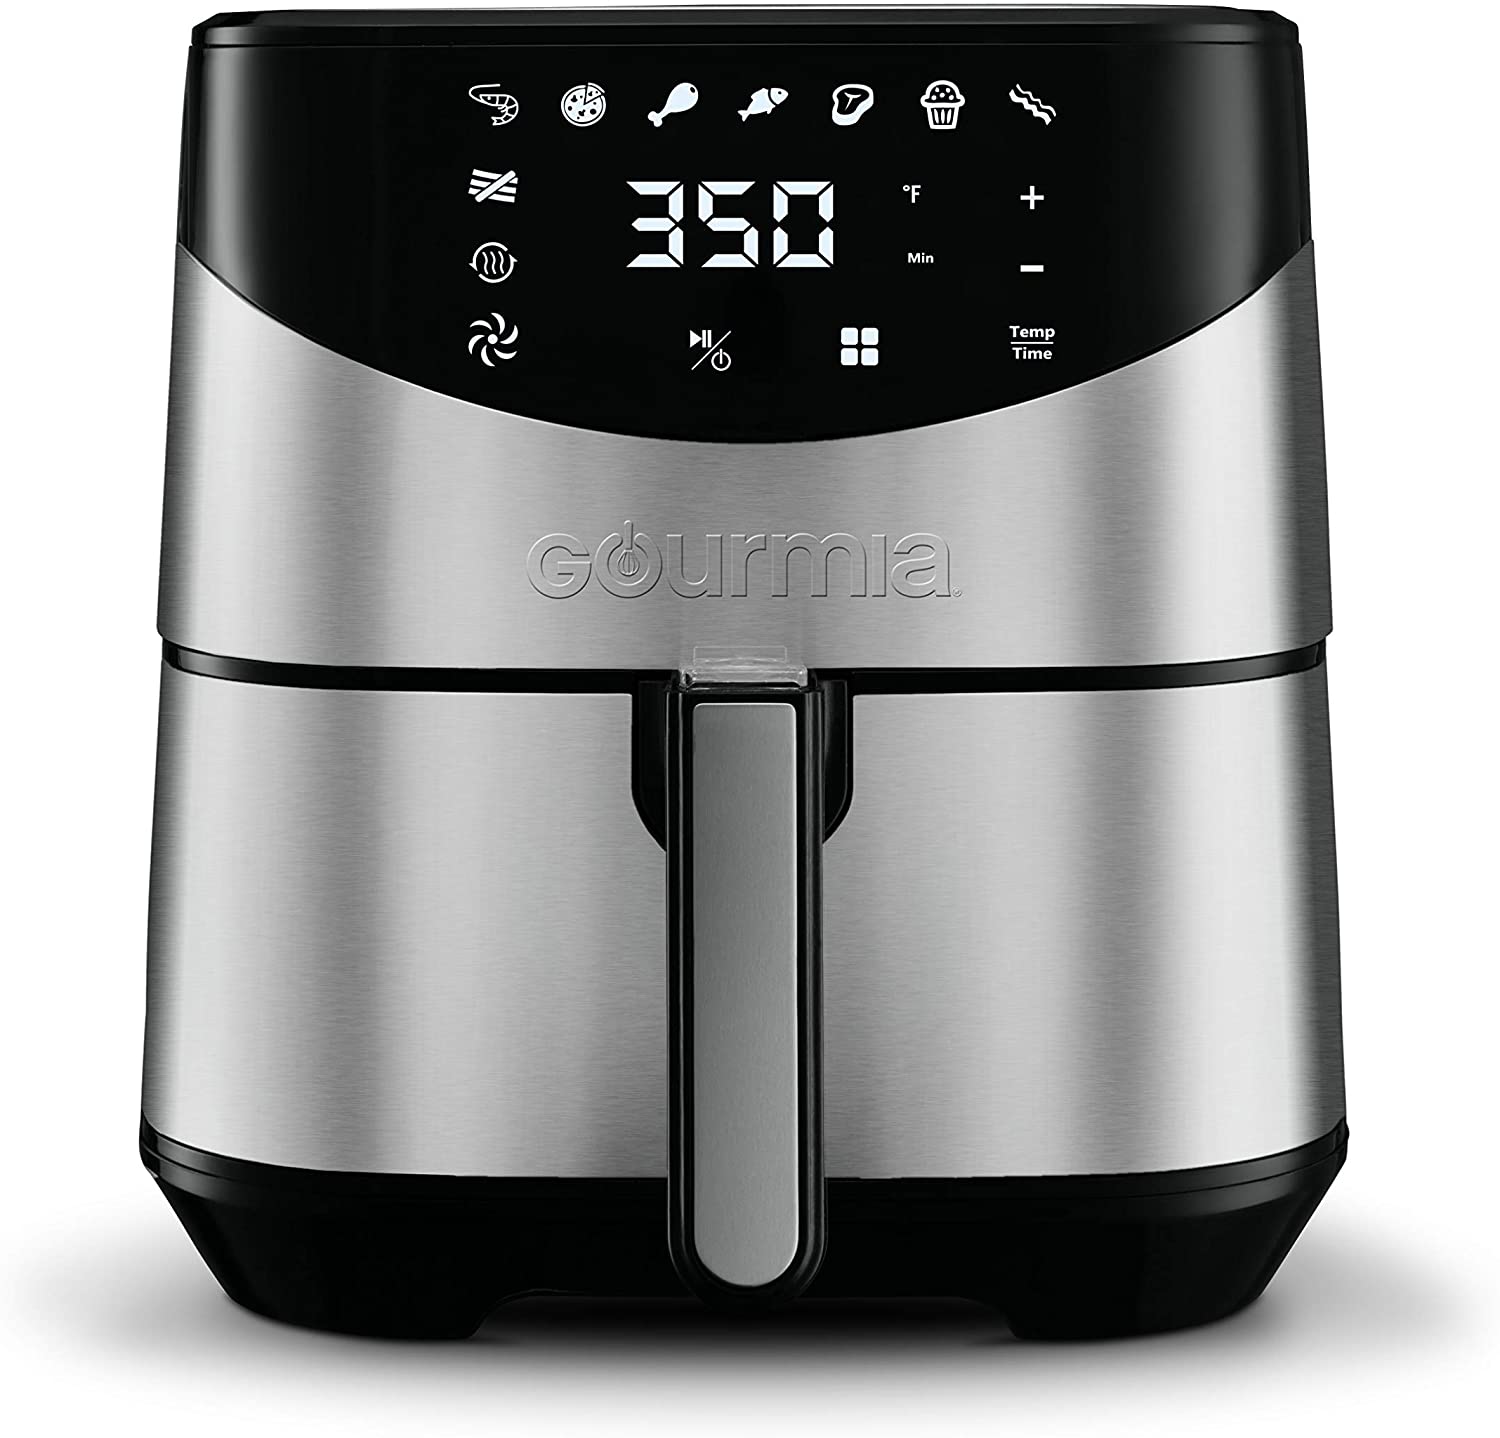 Gourmia Stainless Steel Toaster Oven Air Fryer, 1 ct - Fred Meyer